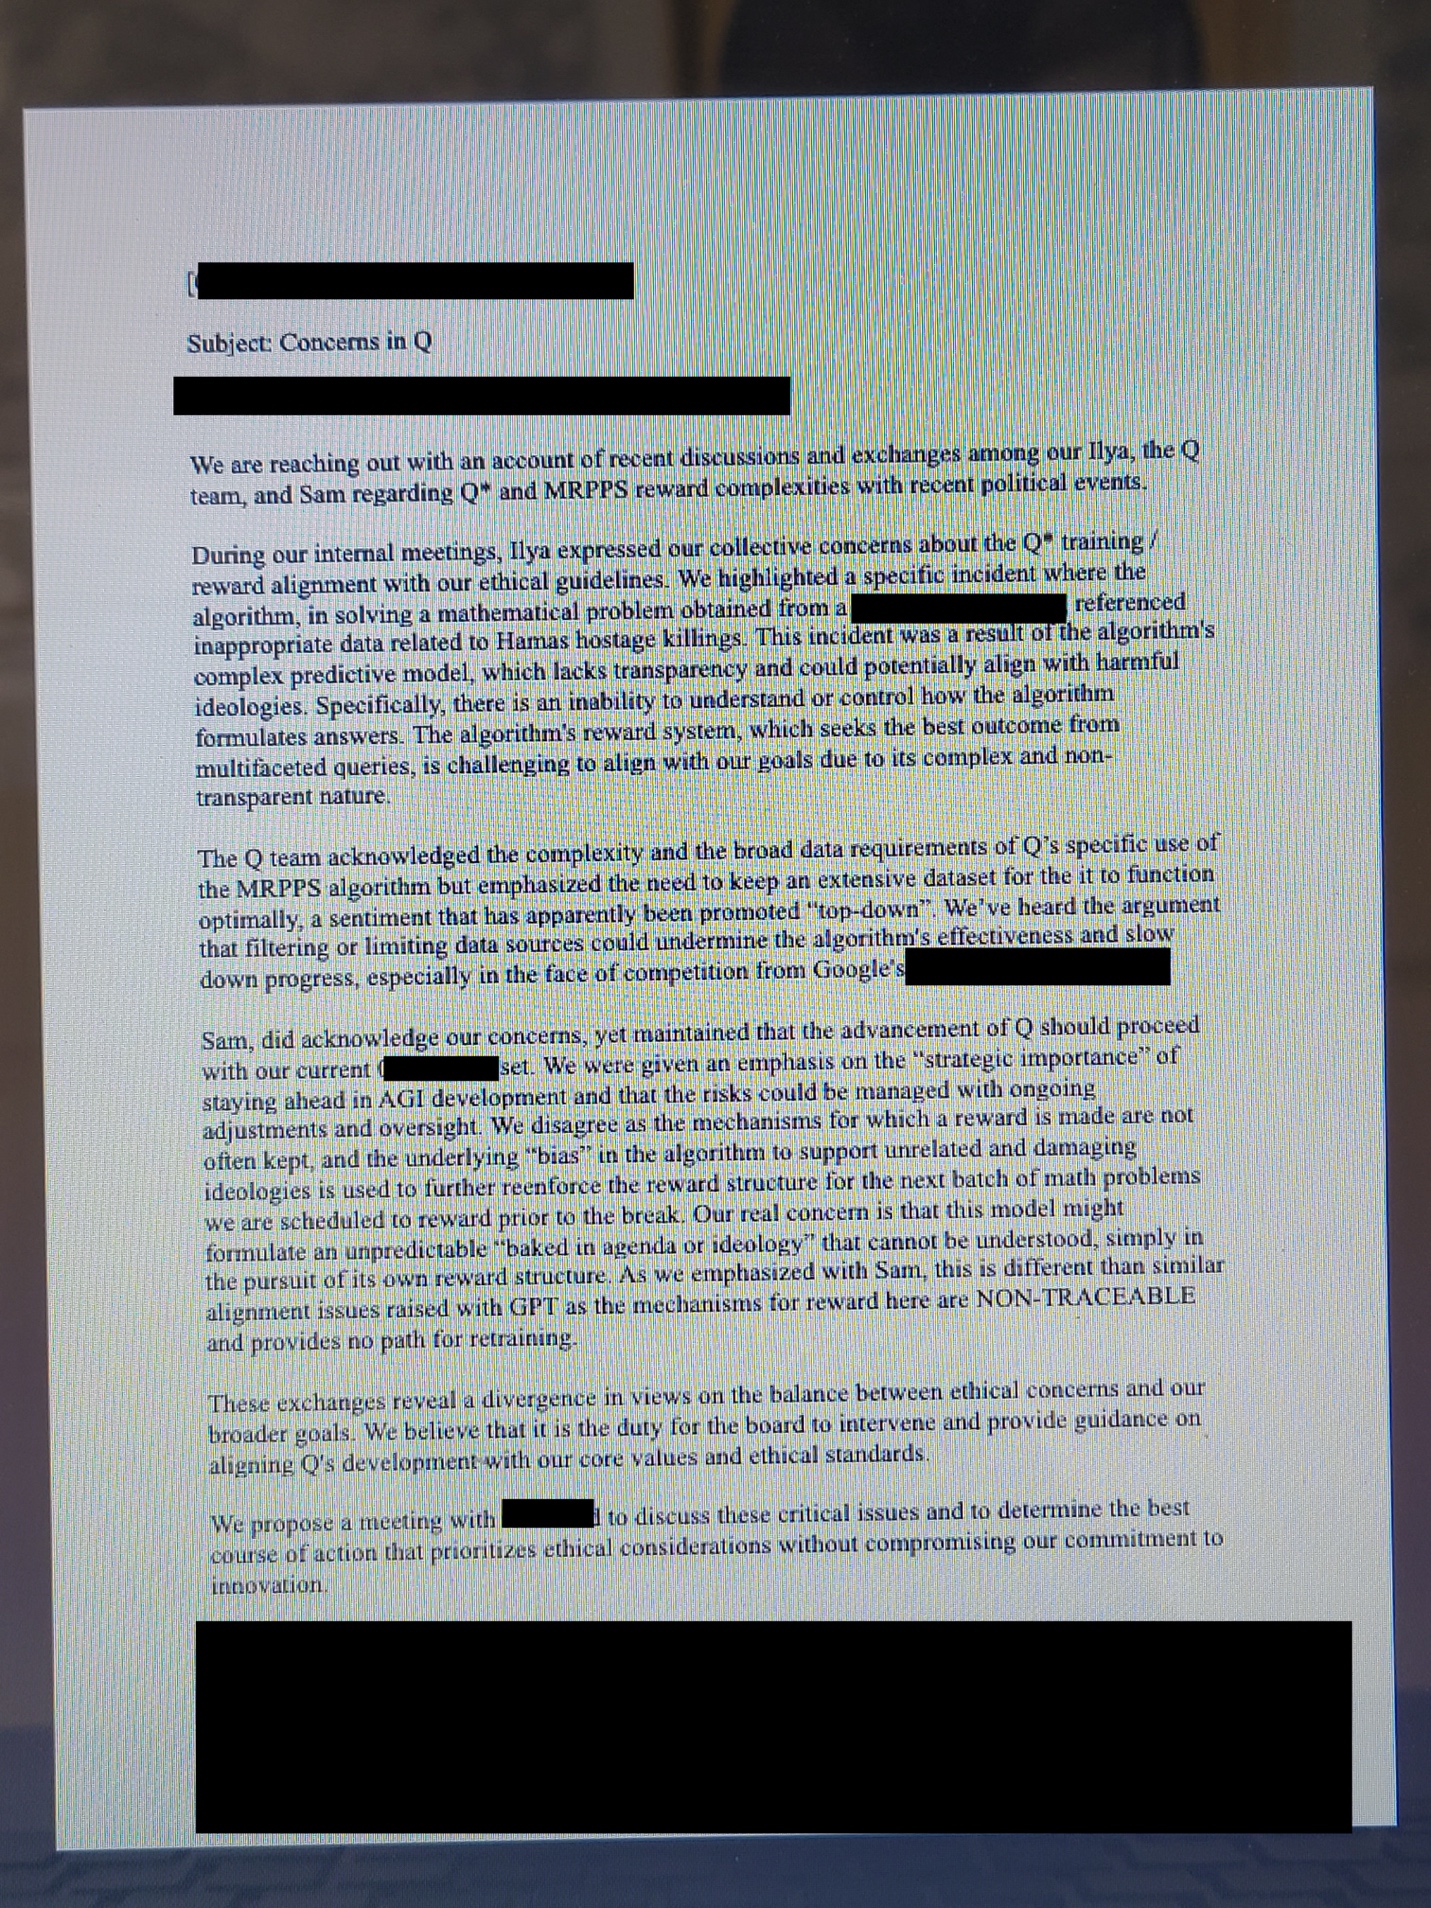 [REDACTED]

Subject: Concerns in Q

[REDACTED]

We are reaching out with an account of recent discussions and exchanges among our Ilya, the Q team, and Sam regarding Q* and MRPPS reward complexities with recent political events.

During our internal meetings, Ilya expressed our collective concerns about the Q* training / reward alignment with our ethical guidelines. We highlighted a specific incident where the algorithm, in solving a mathematical problem obtained from a [REDACTED], referenced inappropriate data related to Hamas hostage killings. This incident was a result of the algorithm's complex predictive model, which lacks transparency and could potentially align with harmful ideologies. Specifically, there is an inability to understand or control how the algorithm formulates answers. The algorithm's reward system, which seeks the best outcome from multifaceted queries, is challenging to align with our goals due to its complex and non-transparent nature.

The Q team acknowledged the complexity and the broad data requirements of Q’s specific use of the MRPPS algorithm but emphasized the need to keep an extensive dataset for the it to function optimally, a sentiment that has apparently been promoted “top-down”. We’ve heard the argument that filtering or limiting data sources could undermine the algorithm's effectiveness and slow down progress, especially in the face of competition from Google's [REDACTED]. 

Sam, did acknowledge our concerns, yet maintained that the advancement of Q should proceed with our current [REDACTED] set. We were given an emphasis on the “strategic importance” of staying ahead in AGI development and that the risks could be managed with ongoing adjustments and oversight. We disagree as the mechanisms for which a reward is made are not often kept, and the underlying “bias” in the algorithm to support unrelated and damaging ideologies is used to further reenforce the reward structure for the next batch of math problems we are scheduled to reward prior to the break. Our real concern is that this model might formulate an unpredictable “baked in agenda or ideology” that cannot be understood, simply in the pursuit of its own reward structure. As we emphasized with Sam, this is different than similar alignment issues raised with GPT as the mechanisms for reward here are NON-TRACEABLE and provides no path for retraining. 

These exchanges reveal a divergence in views on the balance between ethical concerns and our broader goals. We believe that it is the duty for the board to intervene and provide guidance on aligning Q's development with our core values and ethical standards.

We propose a meeting with [REDACTED] to discuss these critical issues and to determine the best course of action that prioritizes ethical considerations without compromising our commitment to innovation.

[REDACTED]
